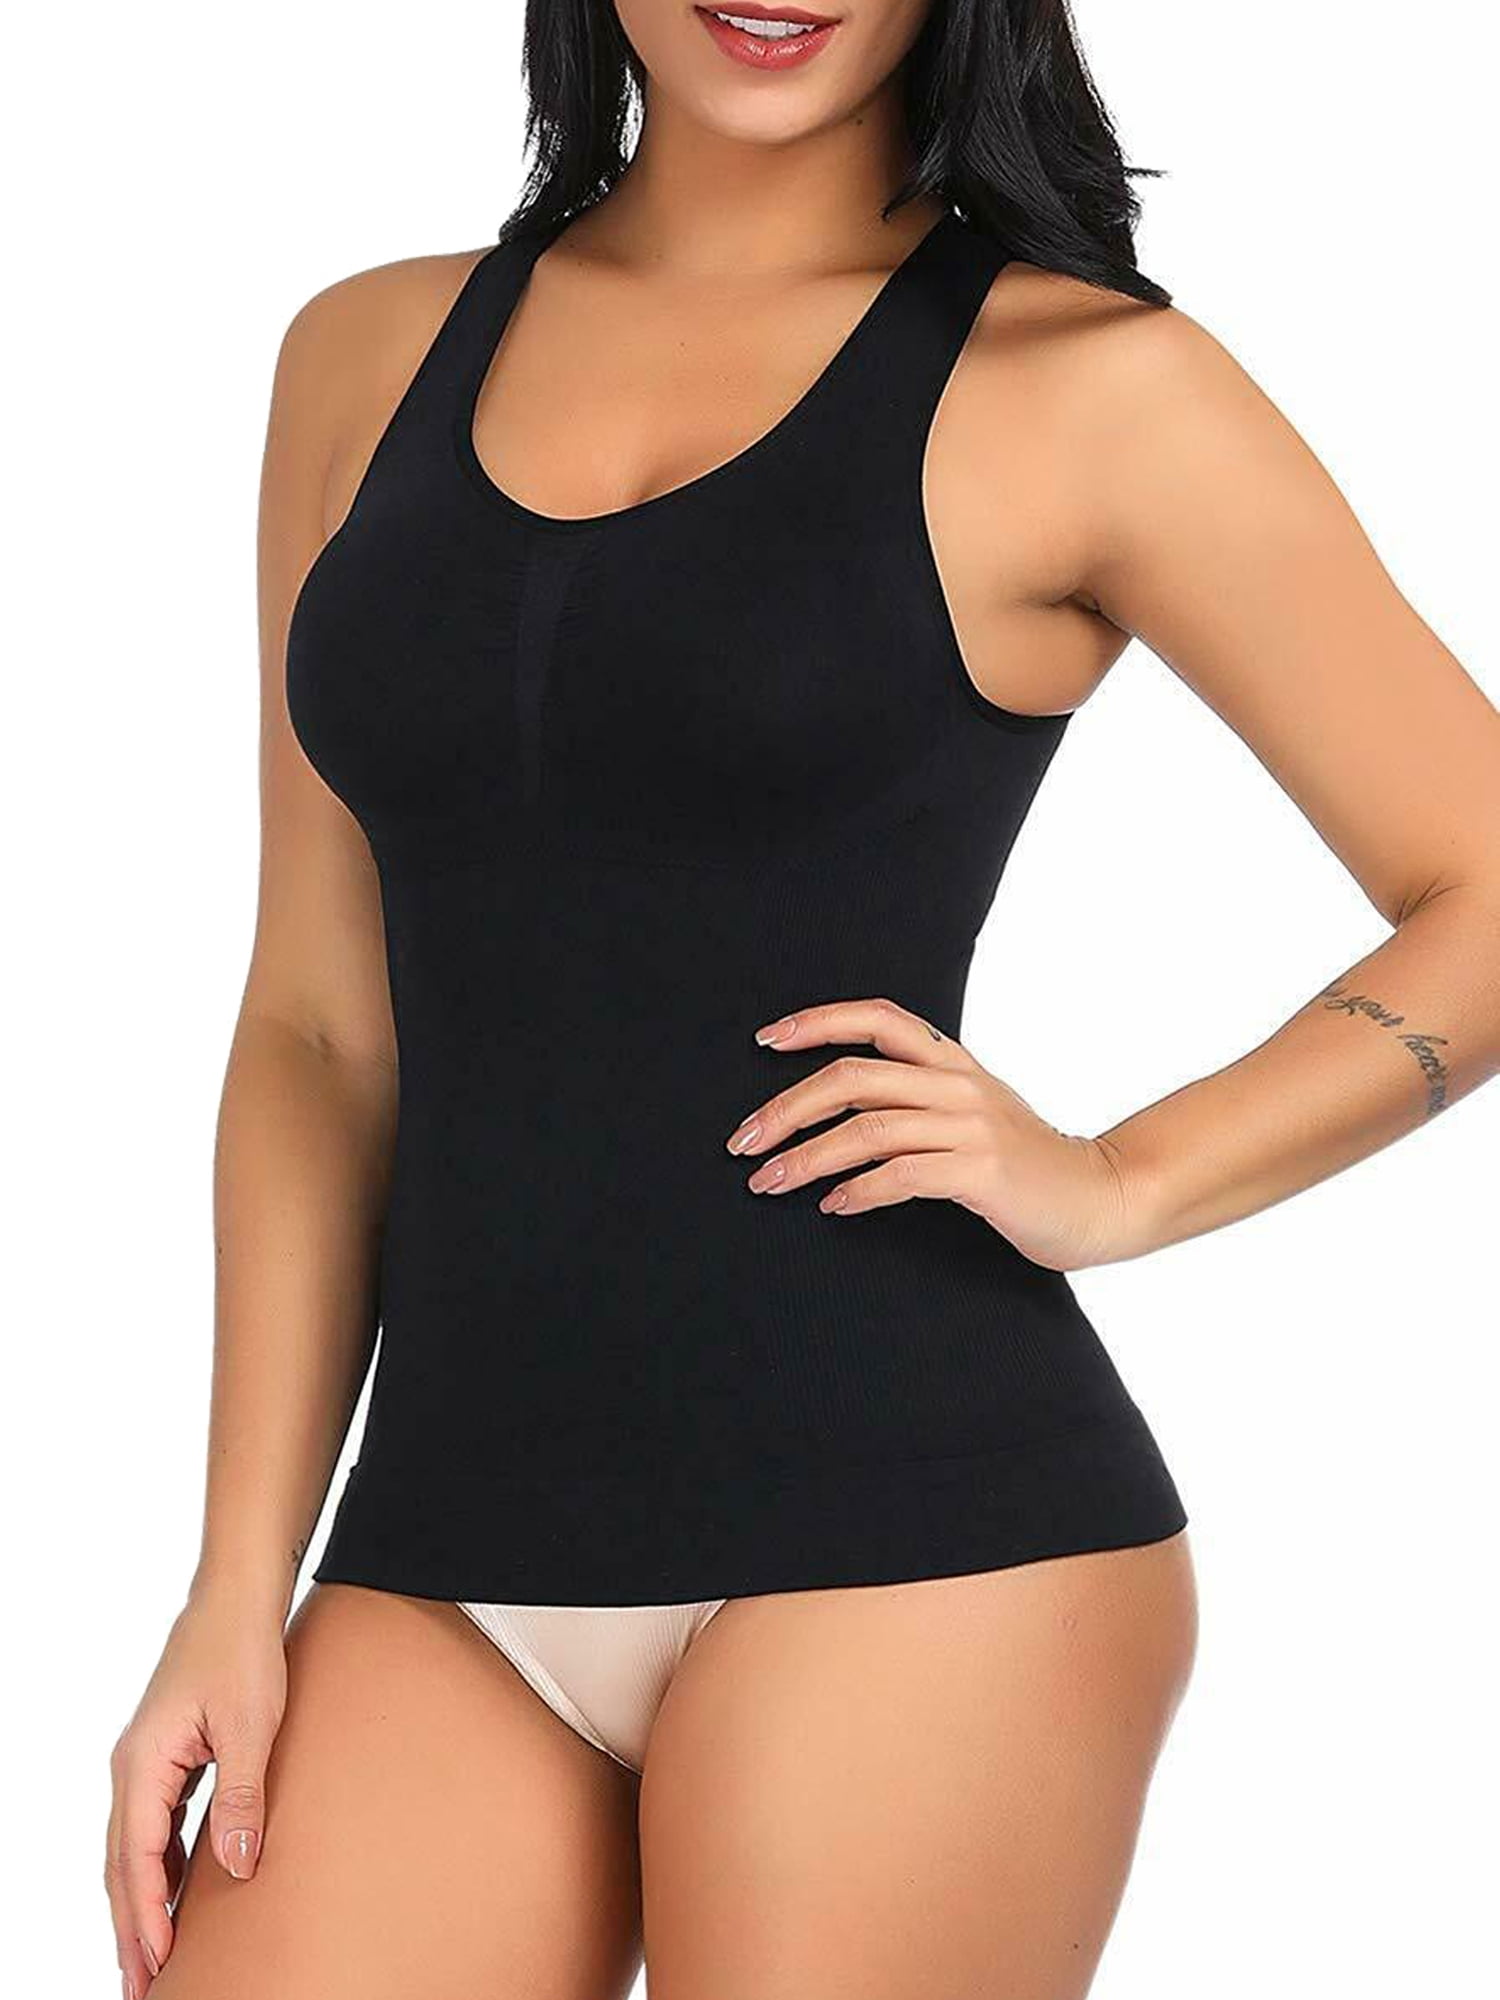 SHAPERIN Women's Compression Camisole with Built in Removable Bra